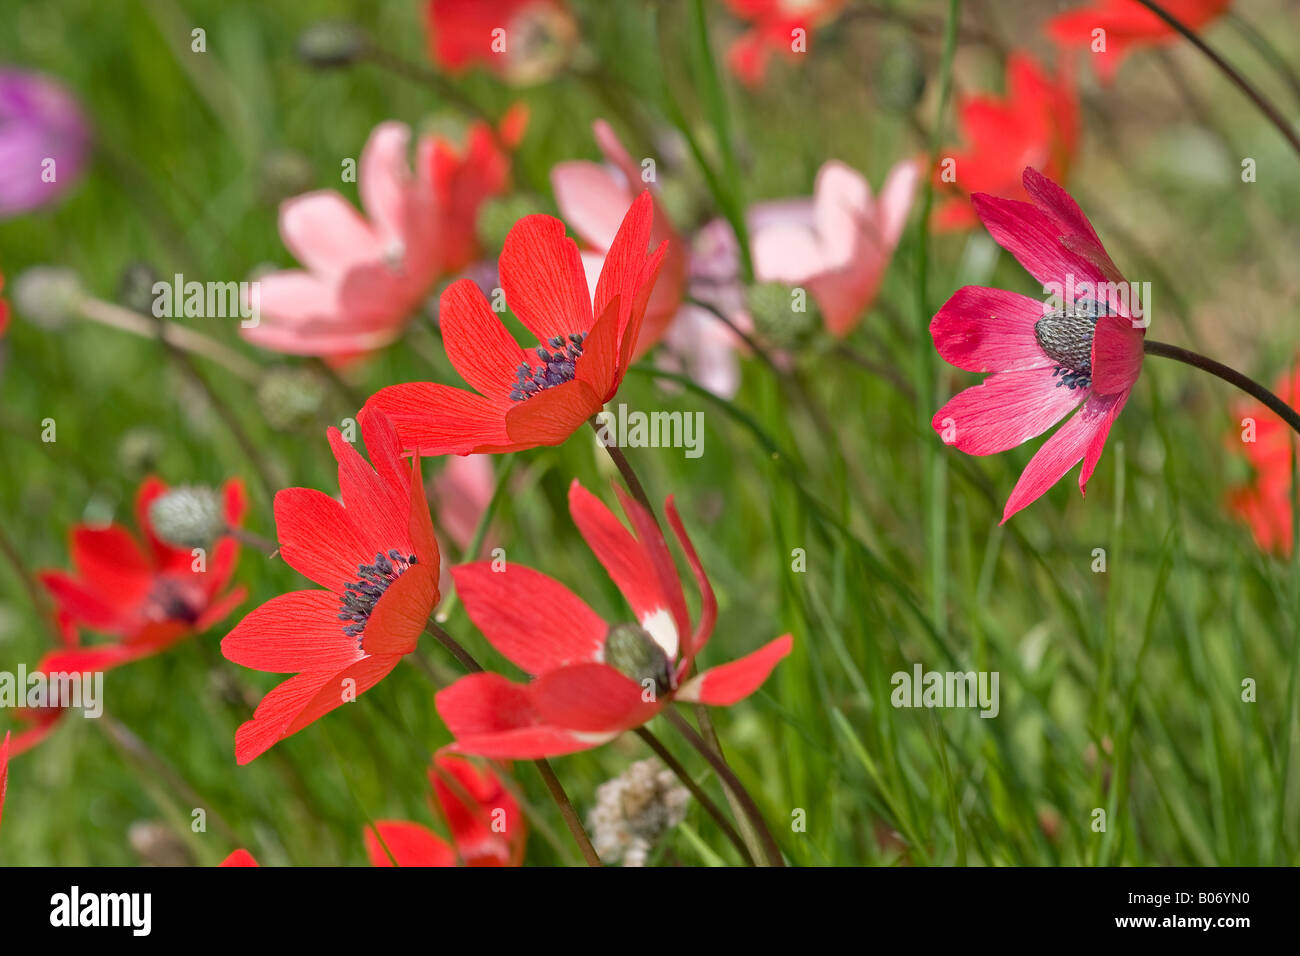 England,UK. A section of an English wildflower meadow with pink and red Anemones in bloom in Spring (Anemone nemorosa) Stock Photo